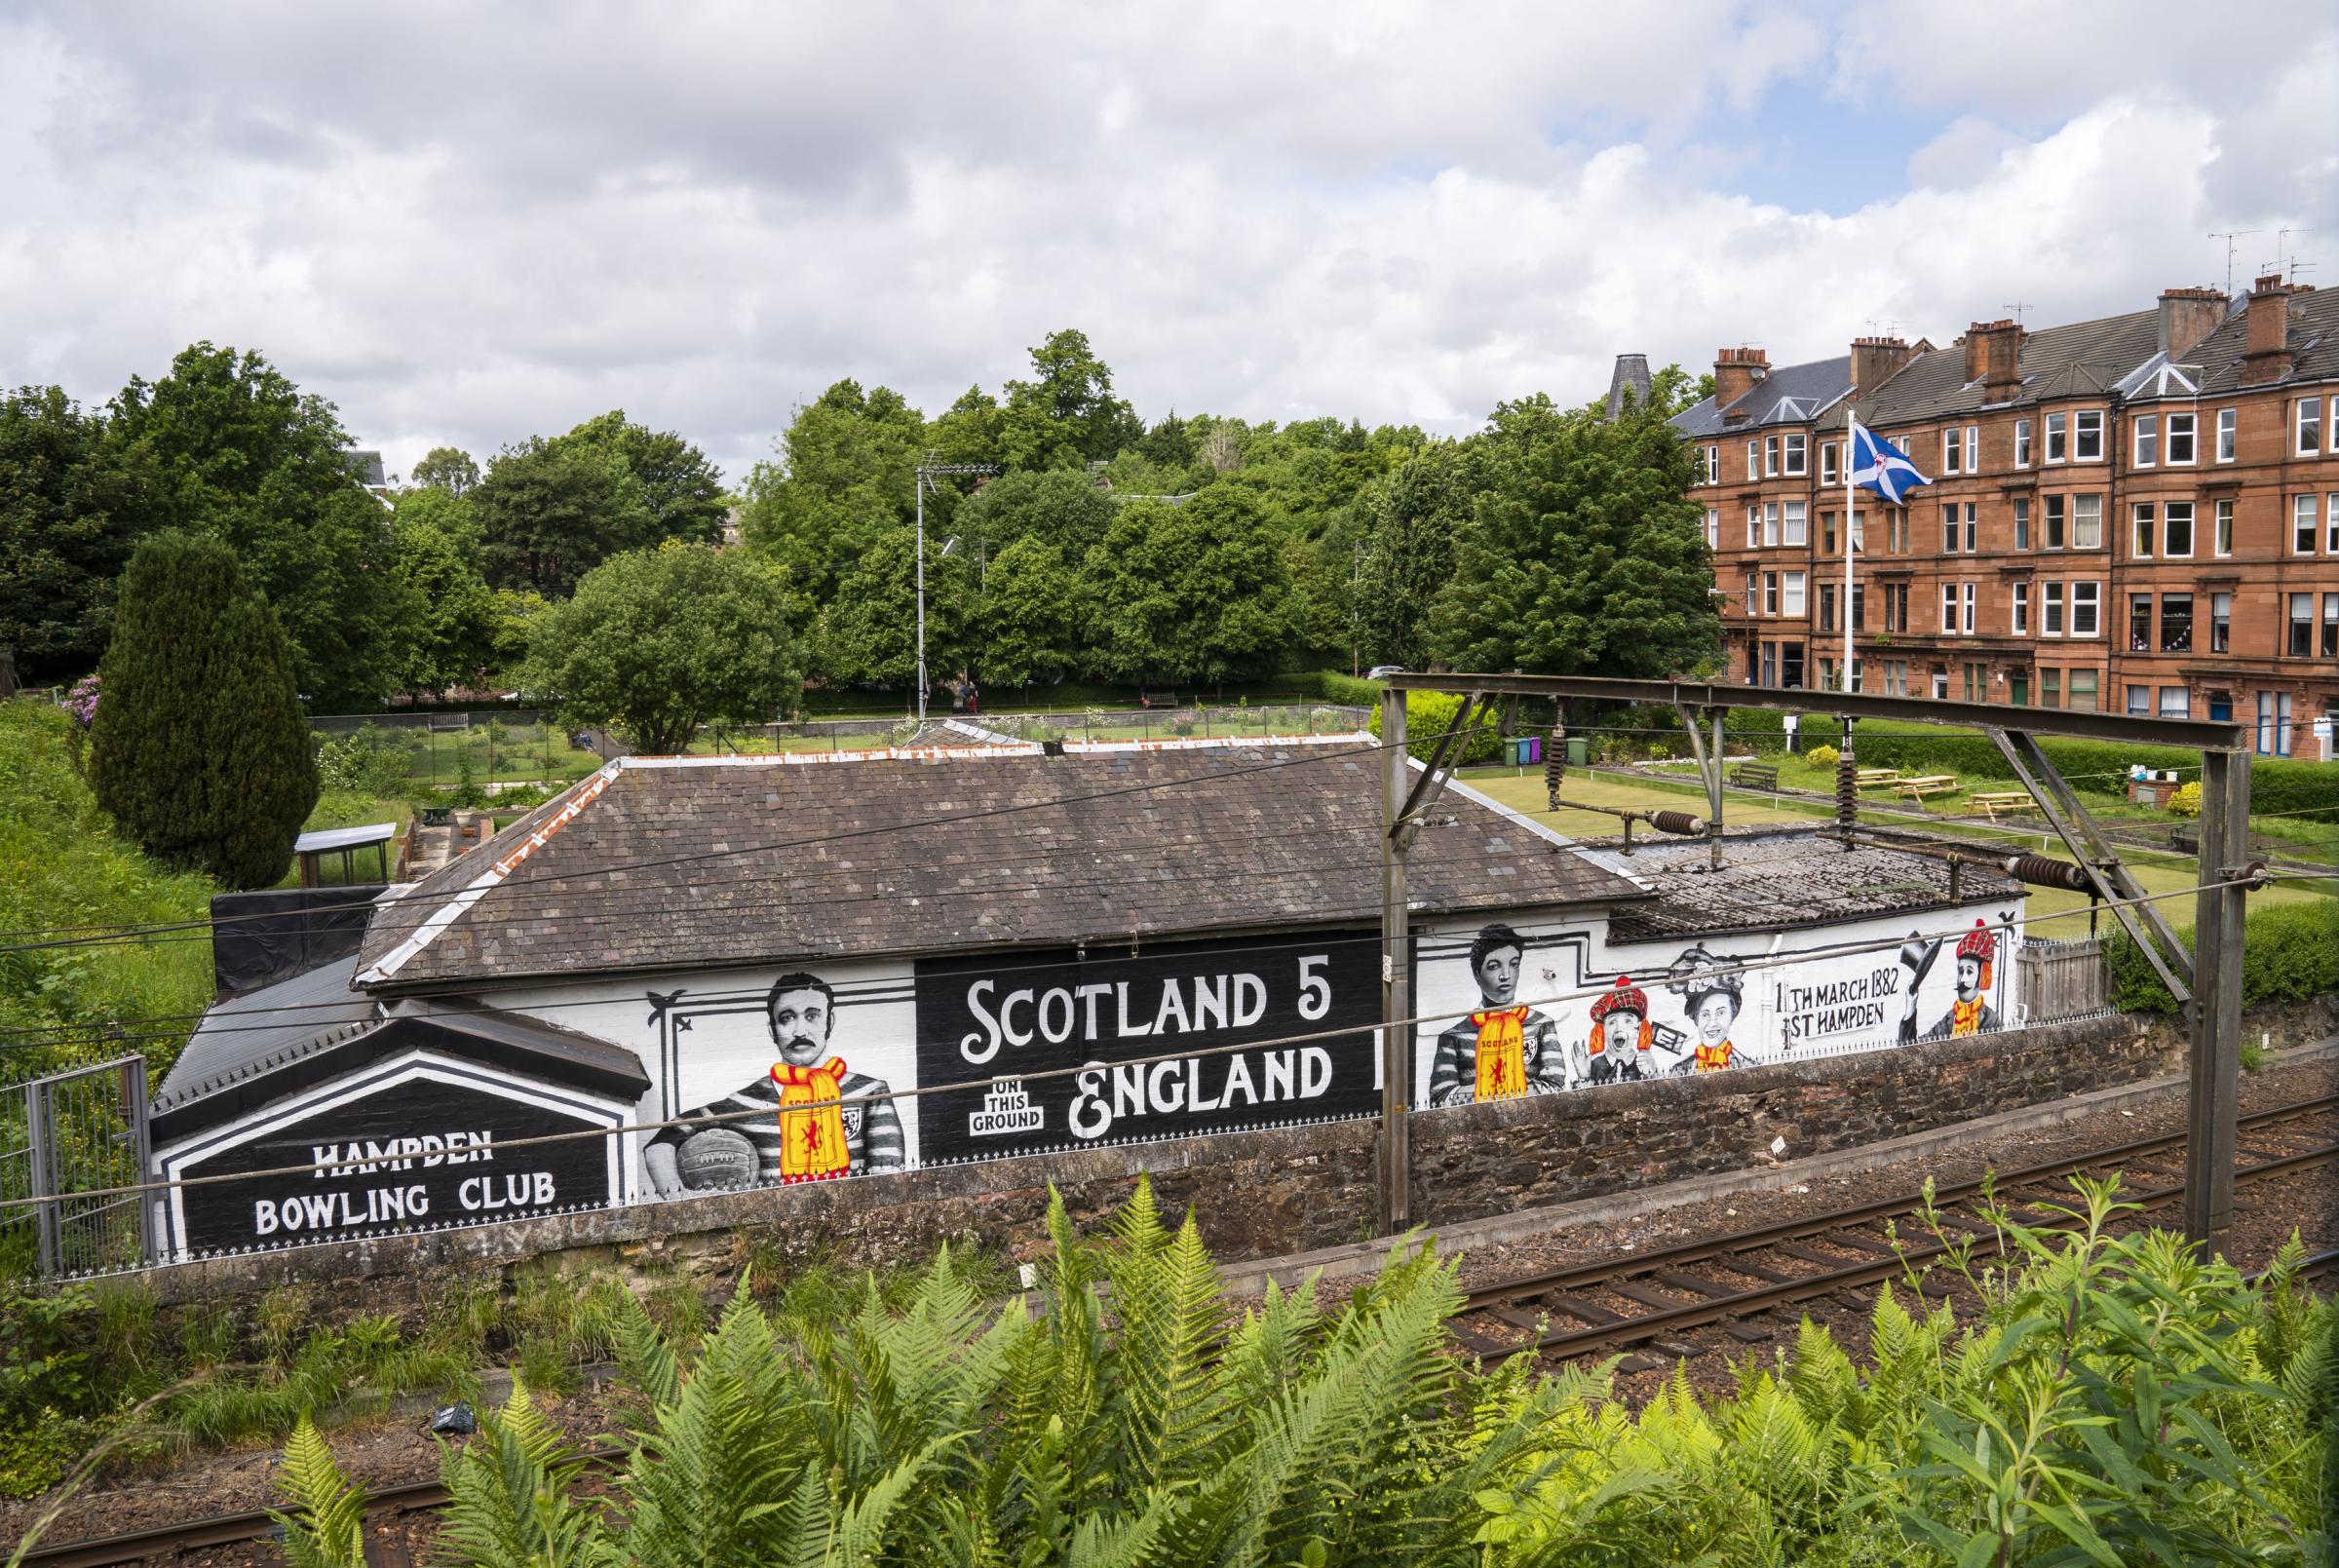 The mural at Hampden Bowling Club, Glasgow, site of the original Hampden Park ground which commemorates the first game played there on March 11, 1882. Scotland won 5-1 against England. 